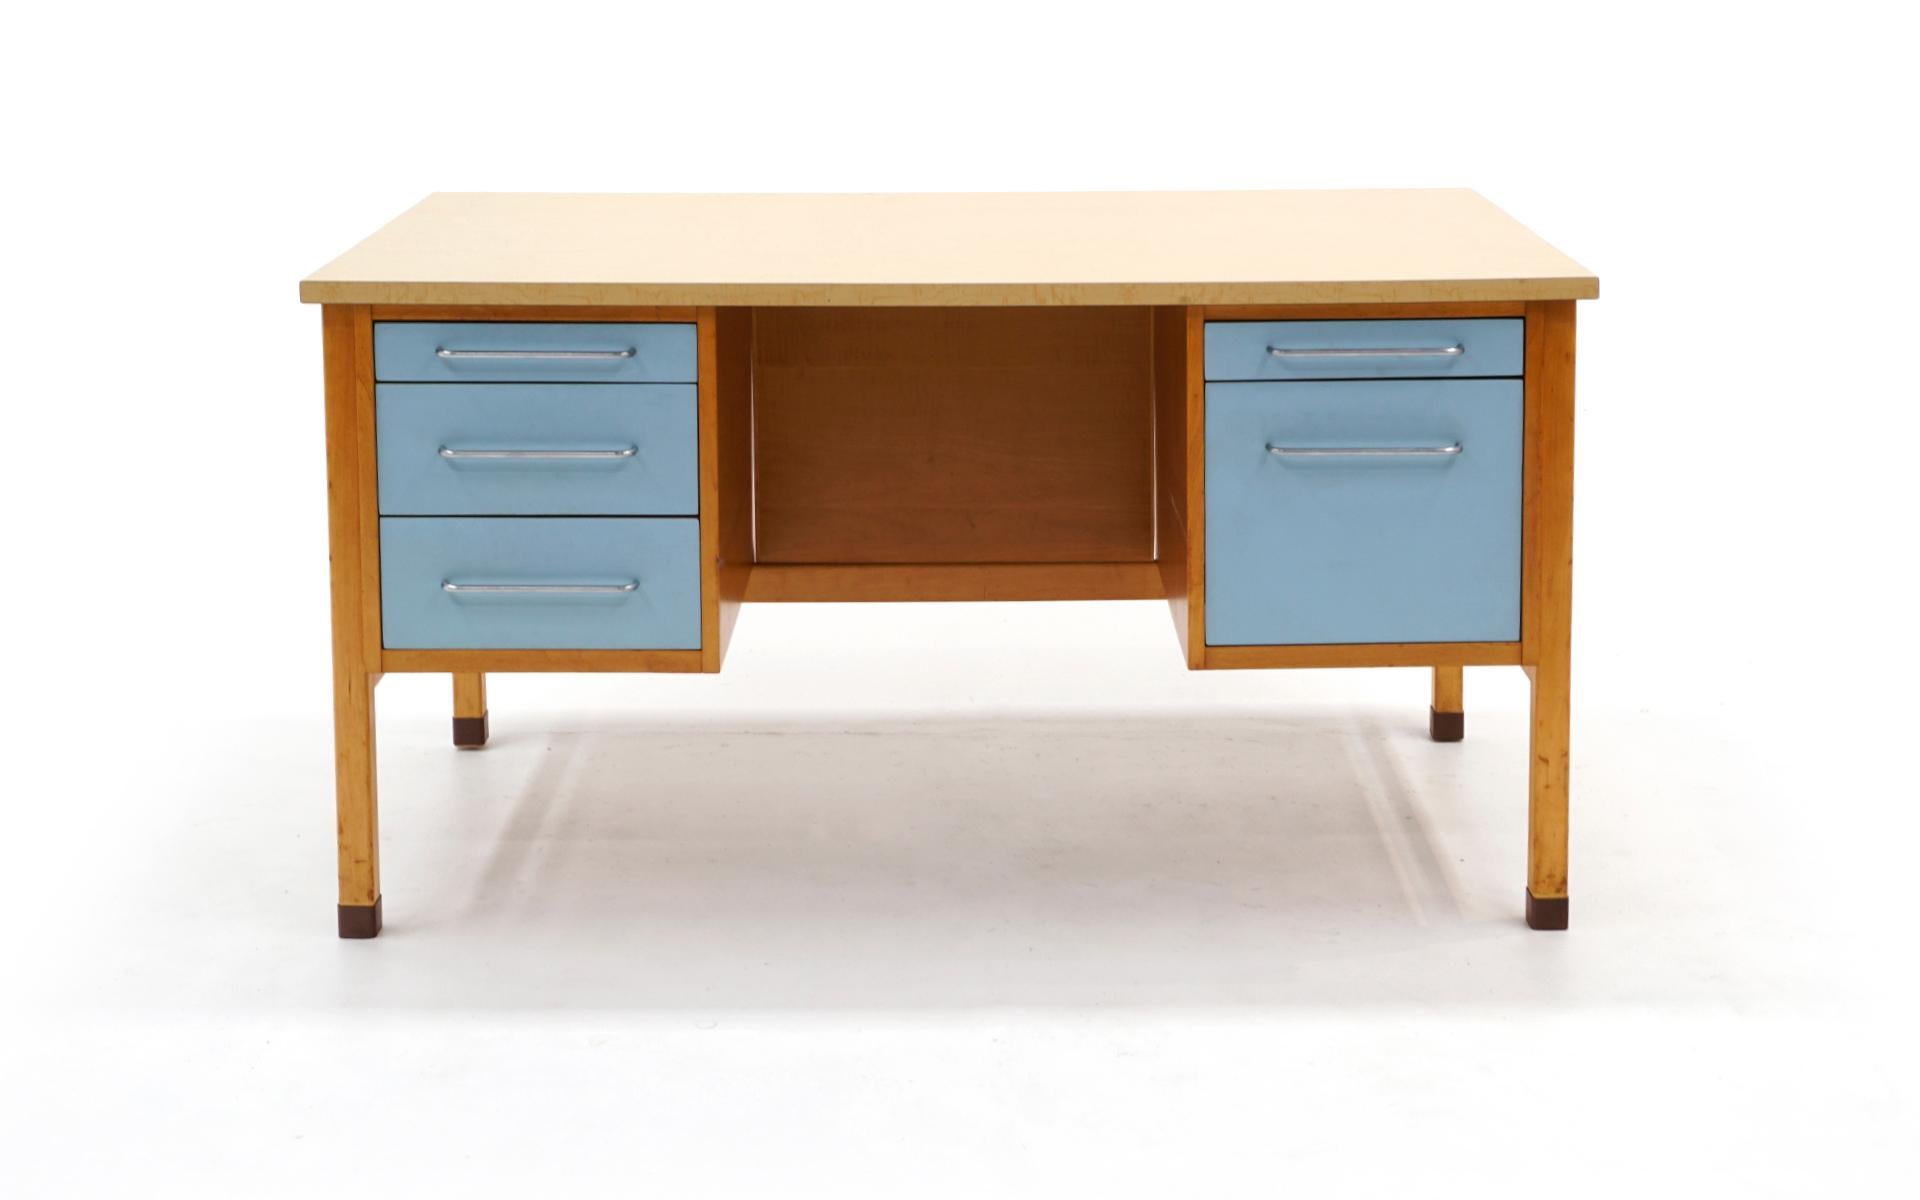 Jens Risom desk for Risom Designs. Birch wood case, light blue lacquered drawer fronts, chrome pulls, brass feet, and virtually indestructible Laminate top. Condition is good and completely original.